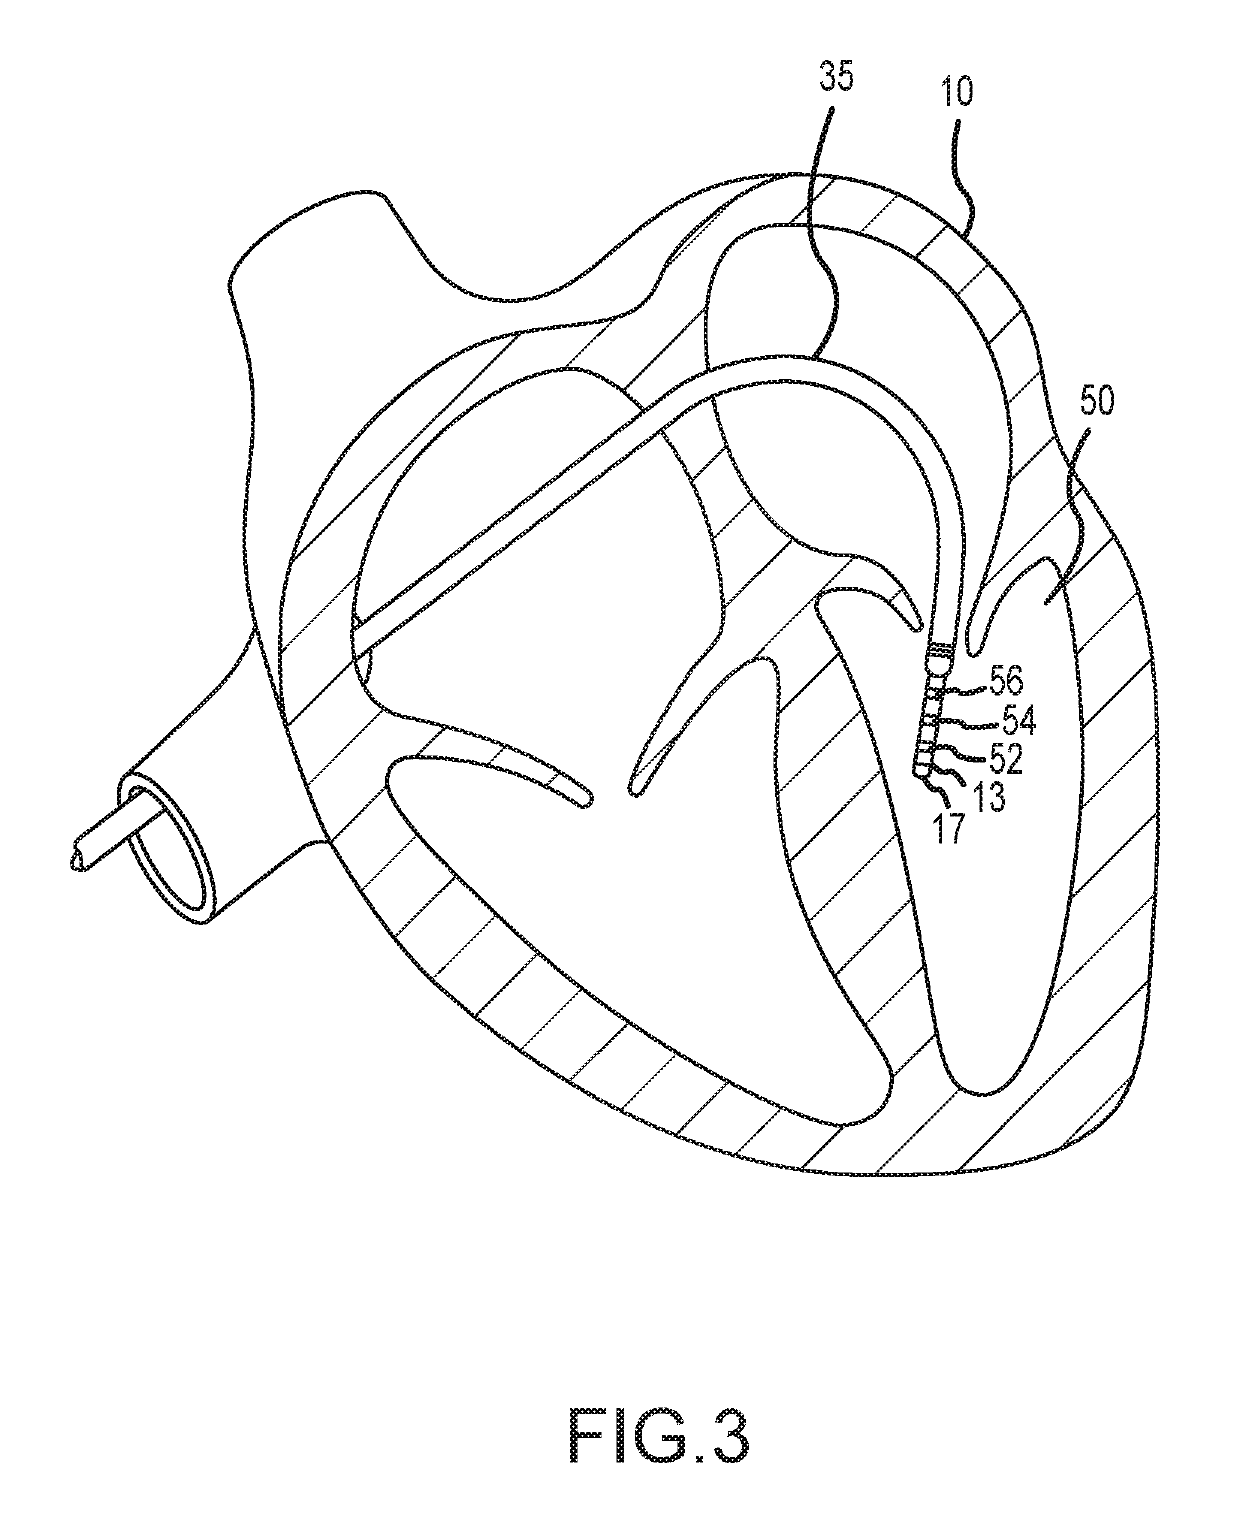 Methods and systems for statistically analyzing electrograms for local abnormal ventricular activities and mapping the same